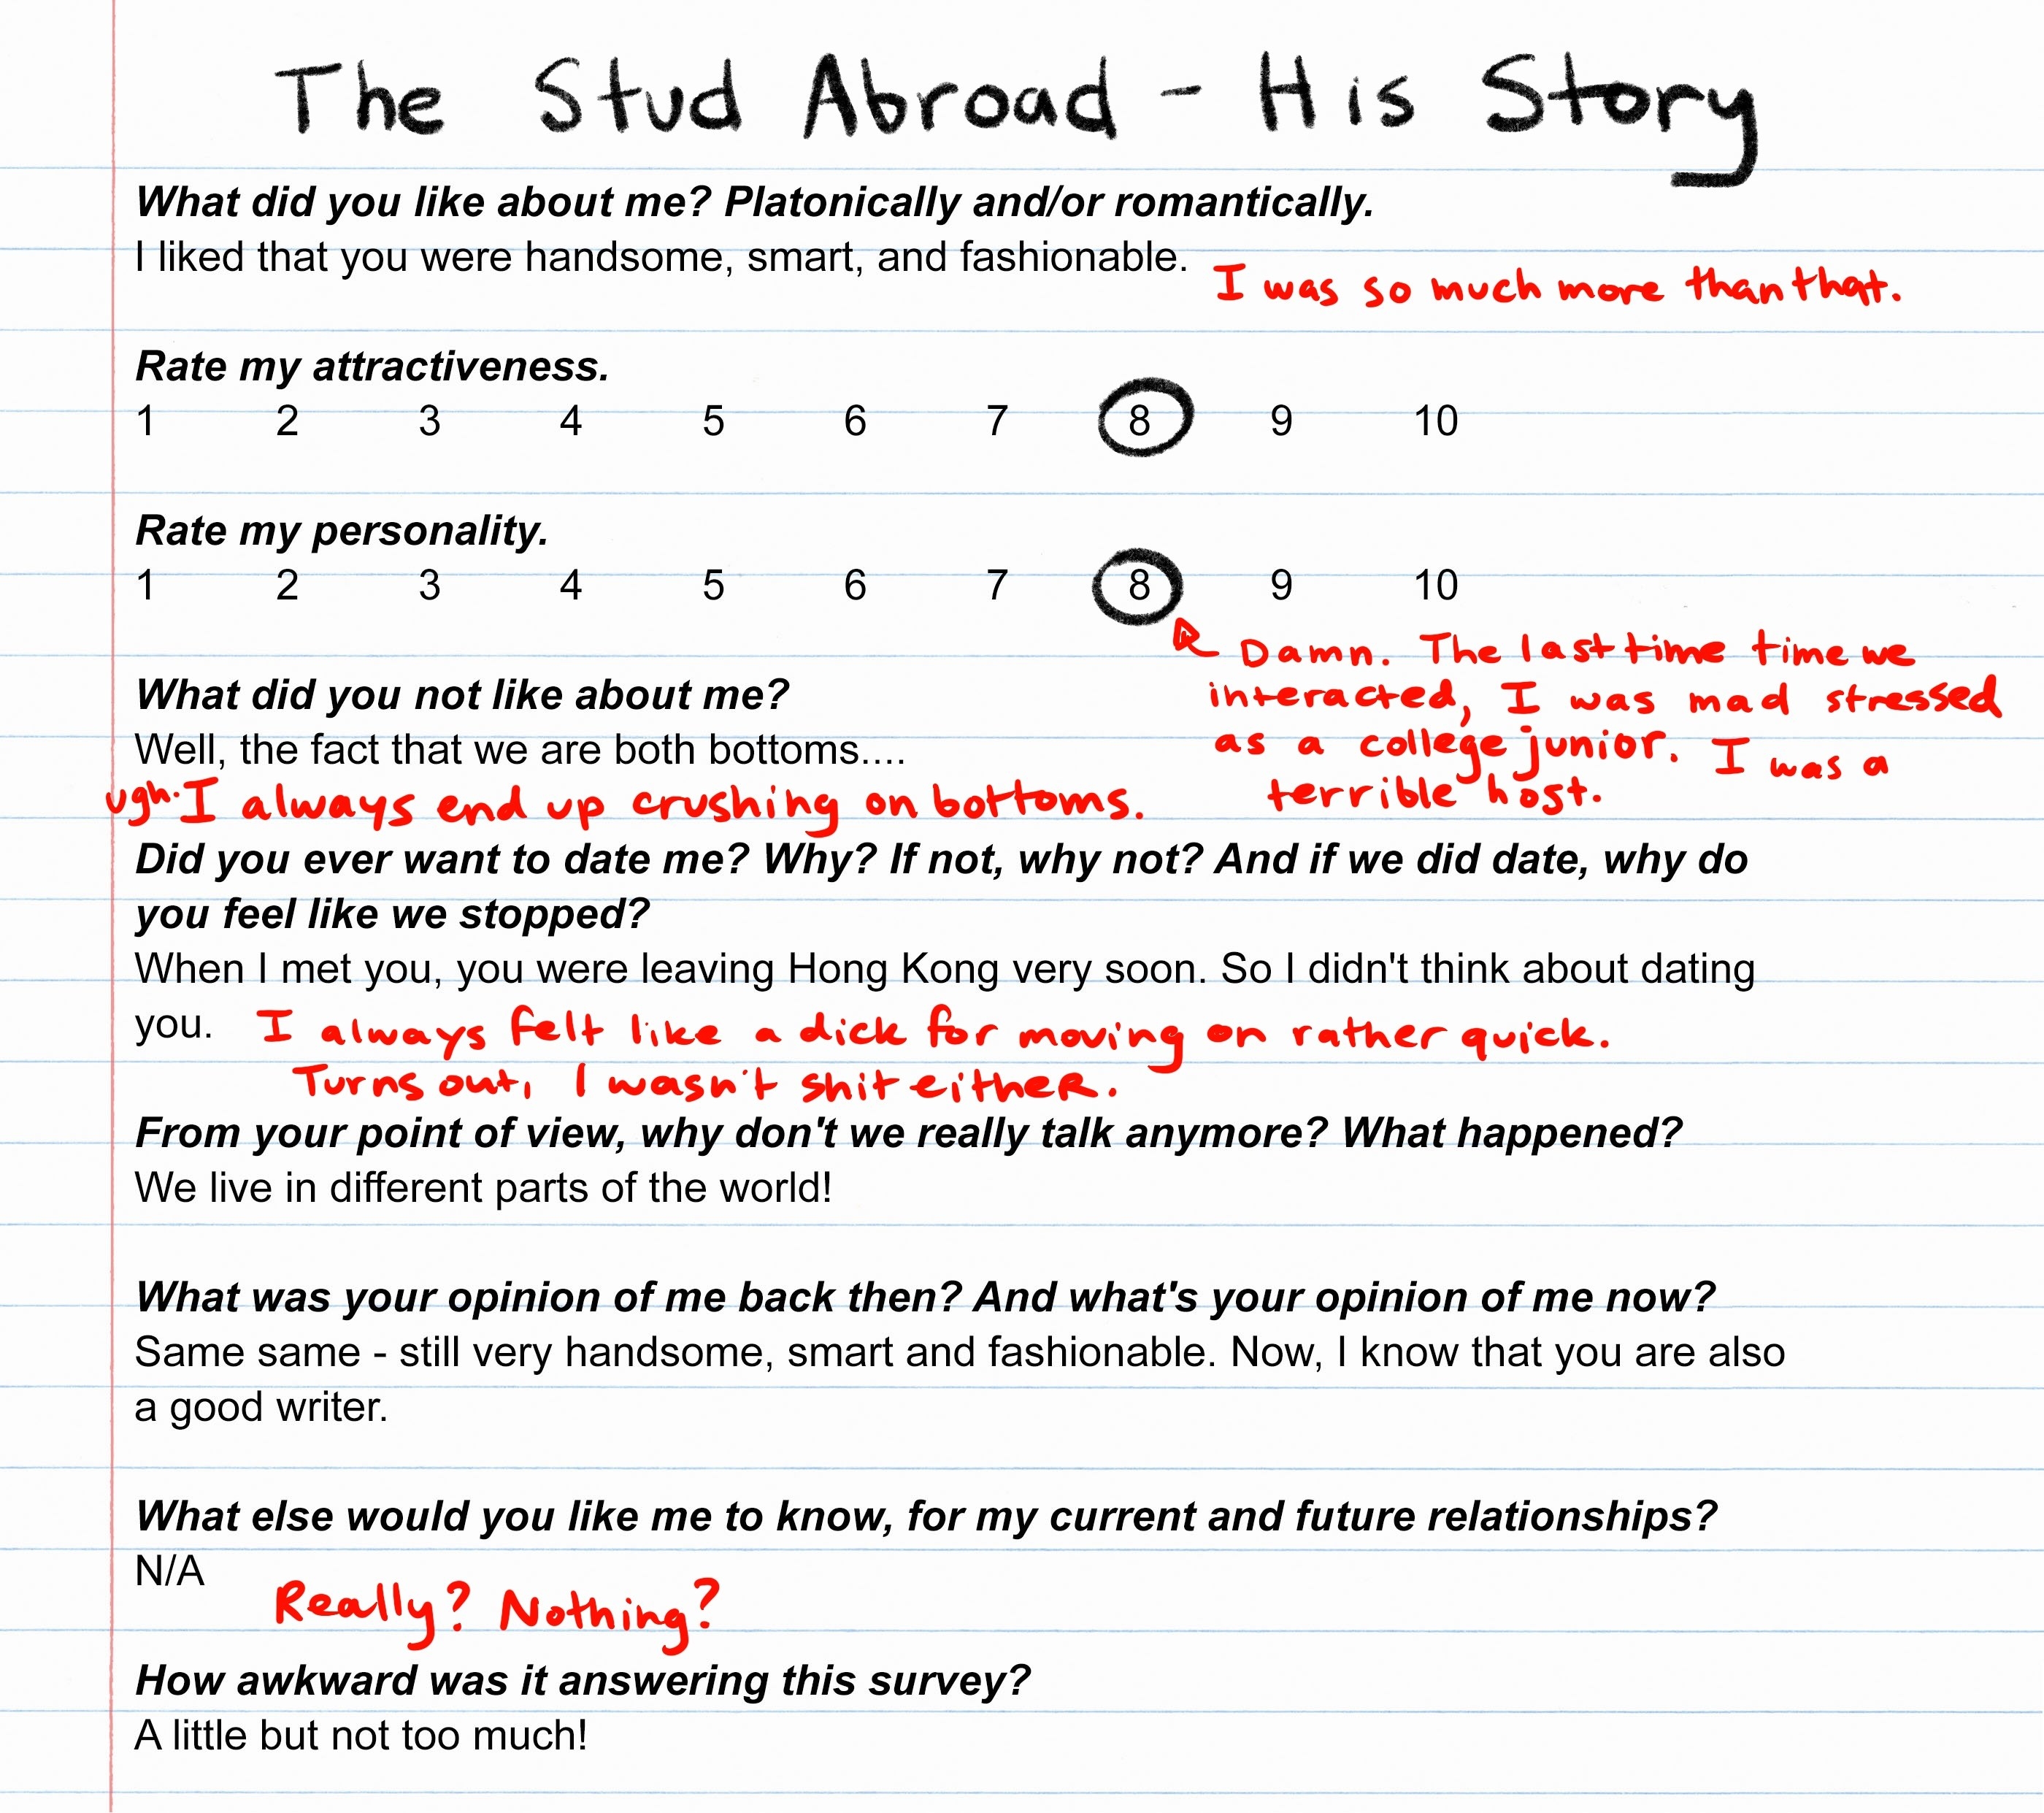 Survey results for The Stud Abroad with comments from the author